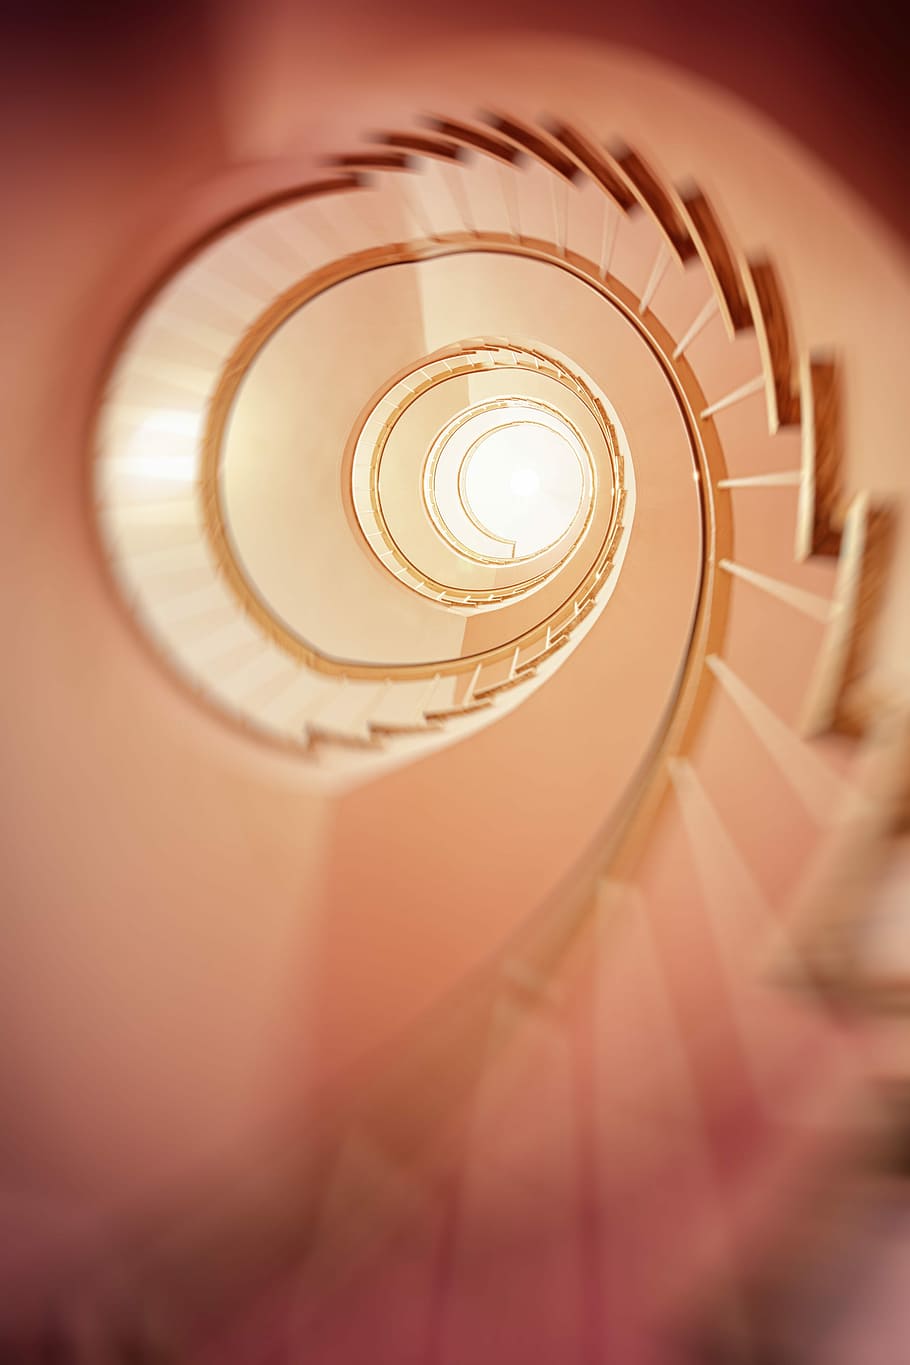 architectural, photography, spiral stairs, spiral staircase, gradually, stairs, architecture, emergence, building, staircase